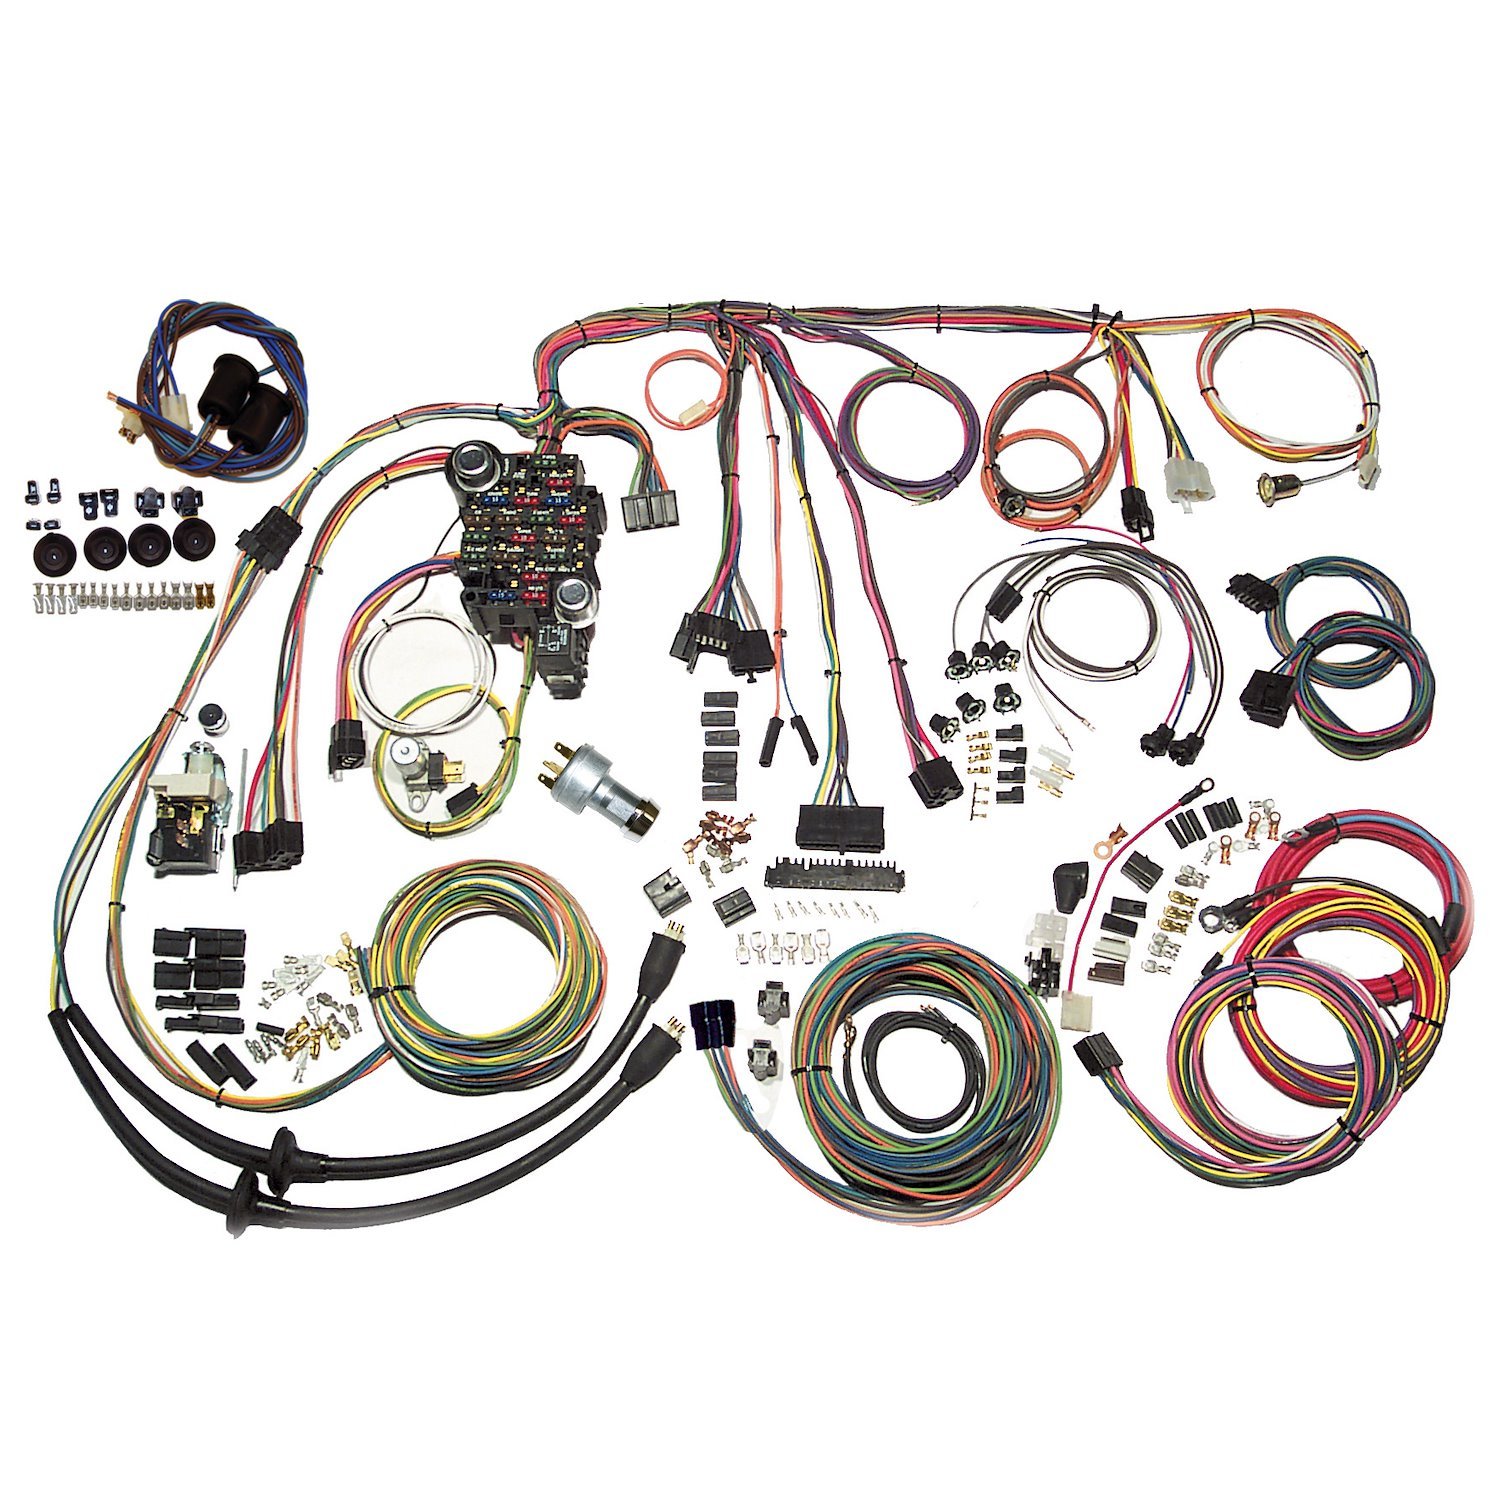 500434 Classic Update Wiring Kit for 1957 Chevy Passenger Car